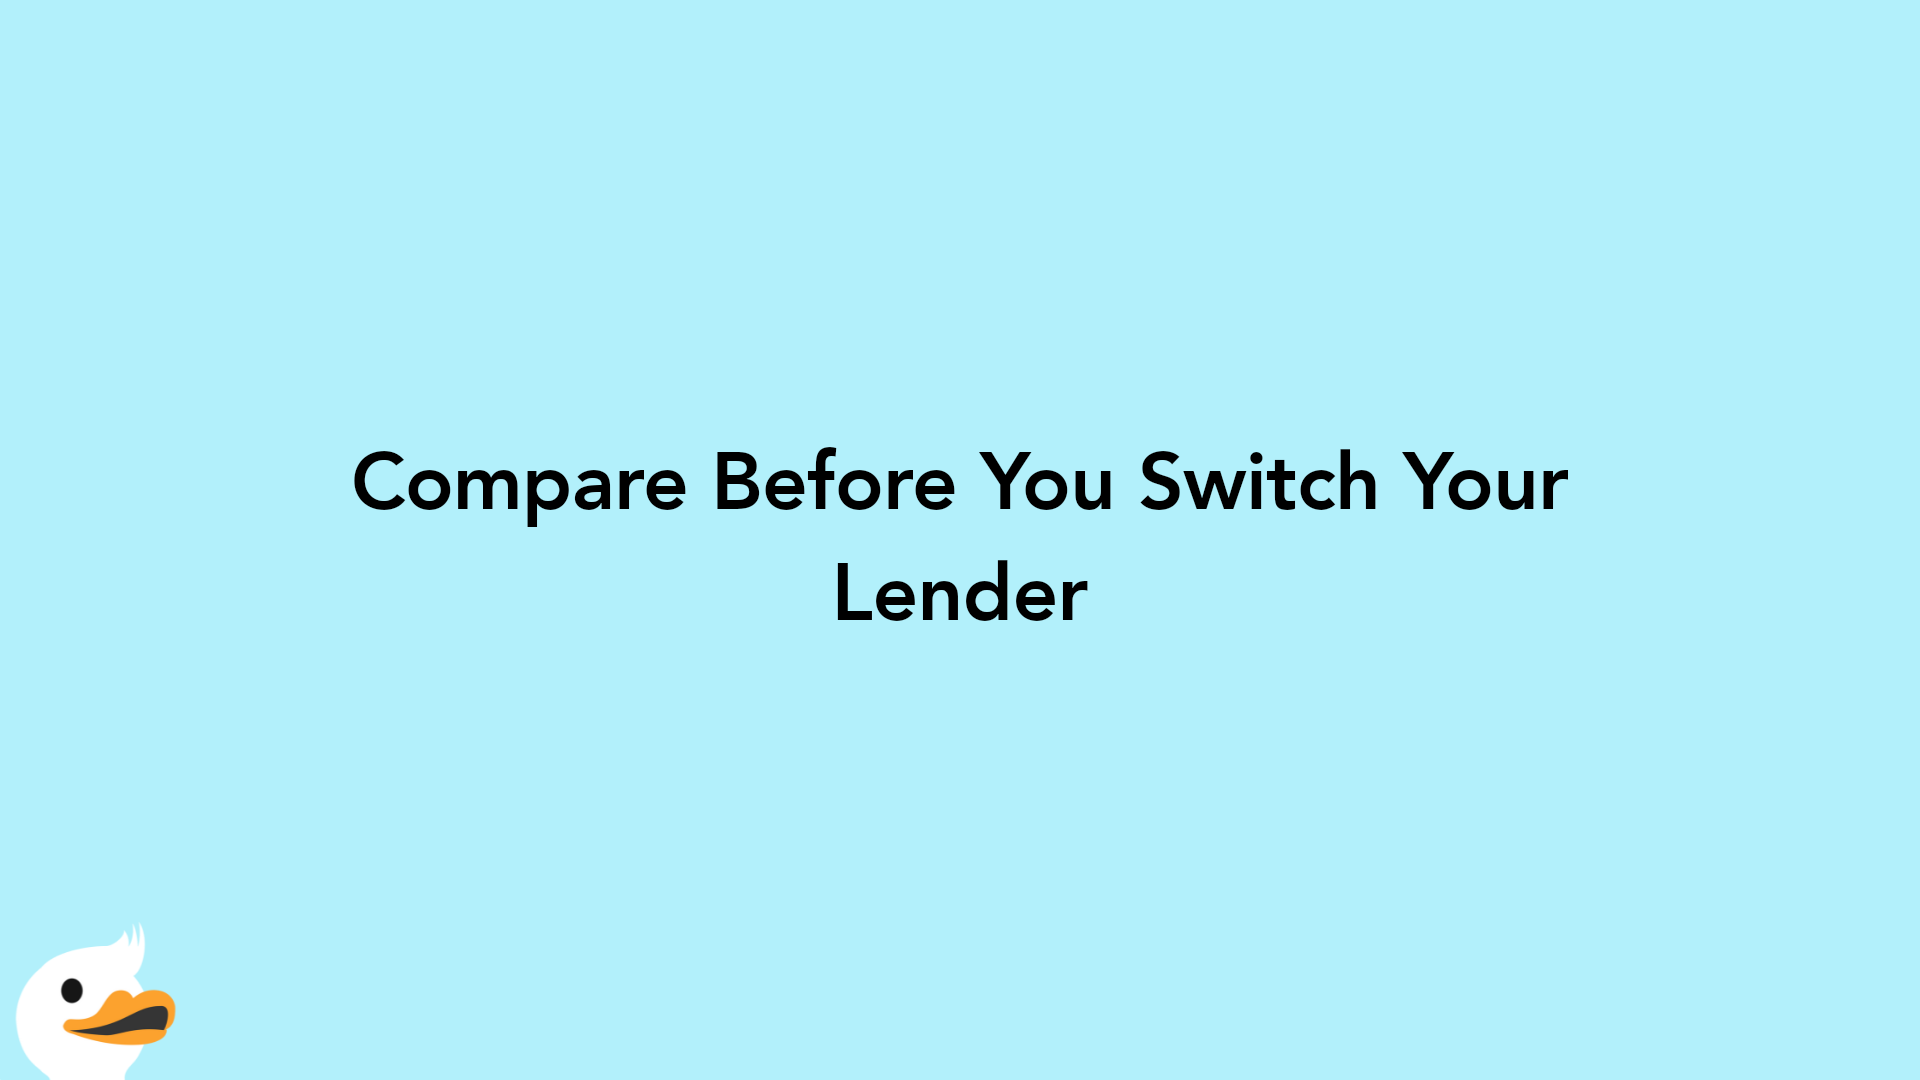 Compare Before You Switch Your Lender